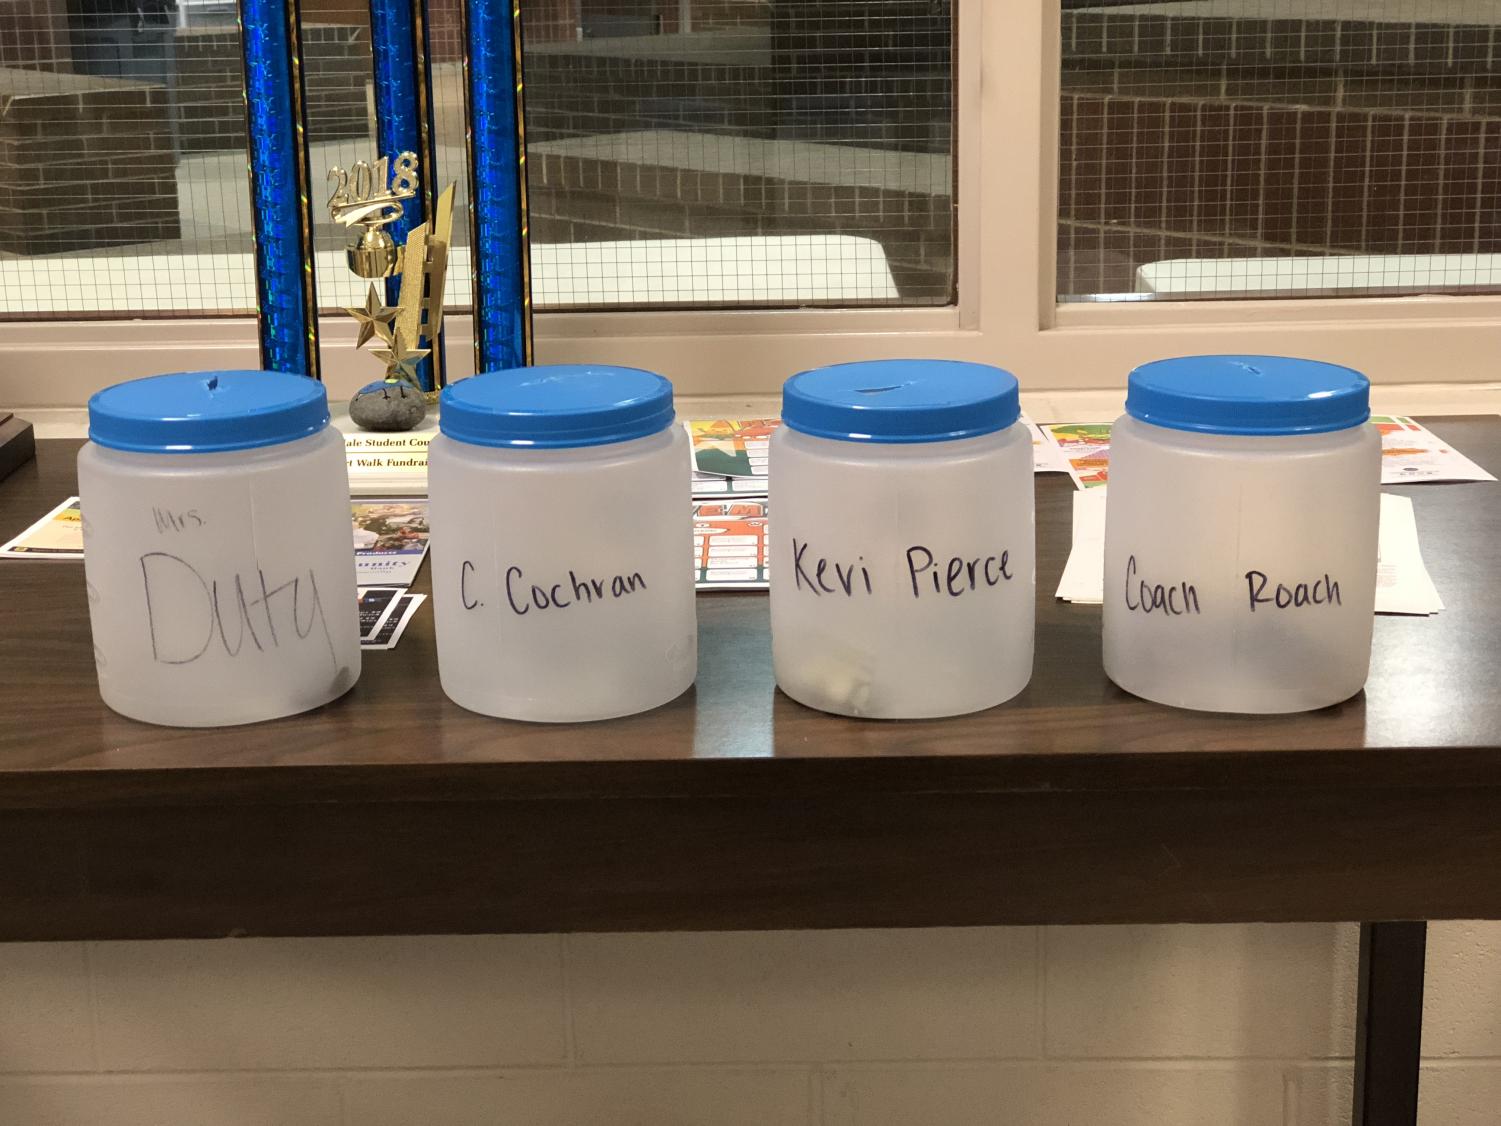 English teacher Cara Duty, head football coach Chris Cochran, math teacher and drill team sponsor Keri Pierce, and football coach and social studies teacher Jacob Roach have volunteered to be pied. Whoevers jar recieves the most donations will recieve a pie to the face at the November 2 pep rally.